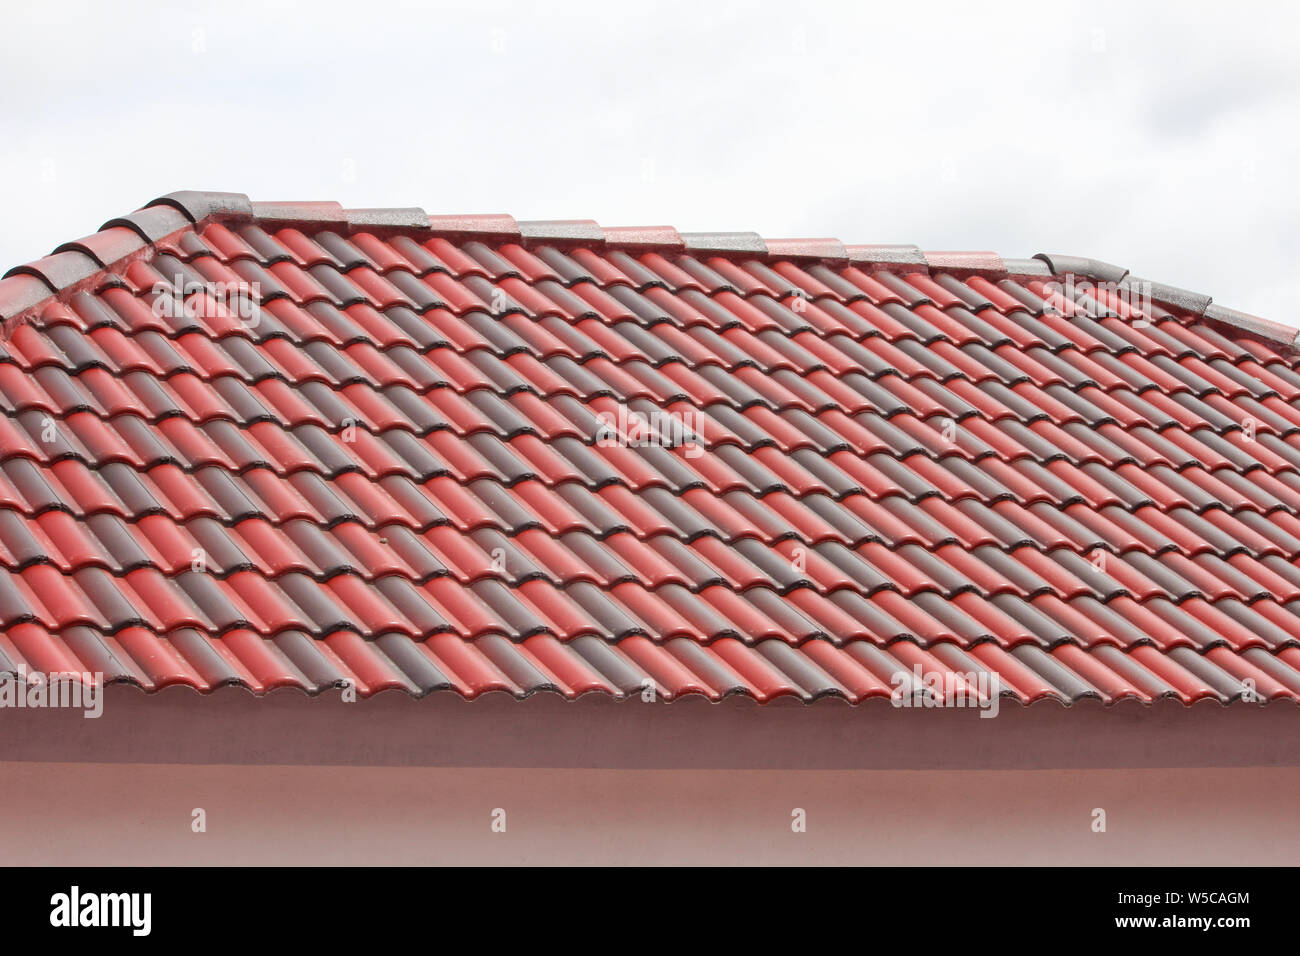 Roof tiles on guest house in Hasanur, Tamil Nadu Stock Photo